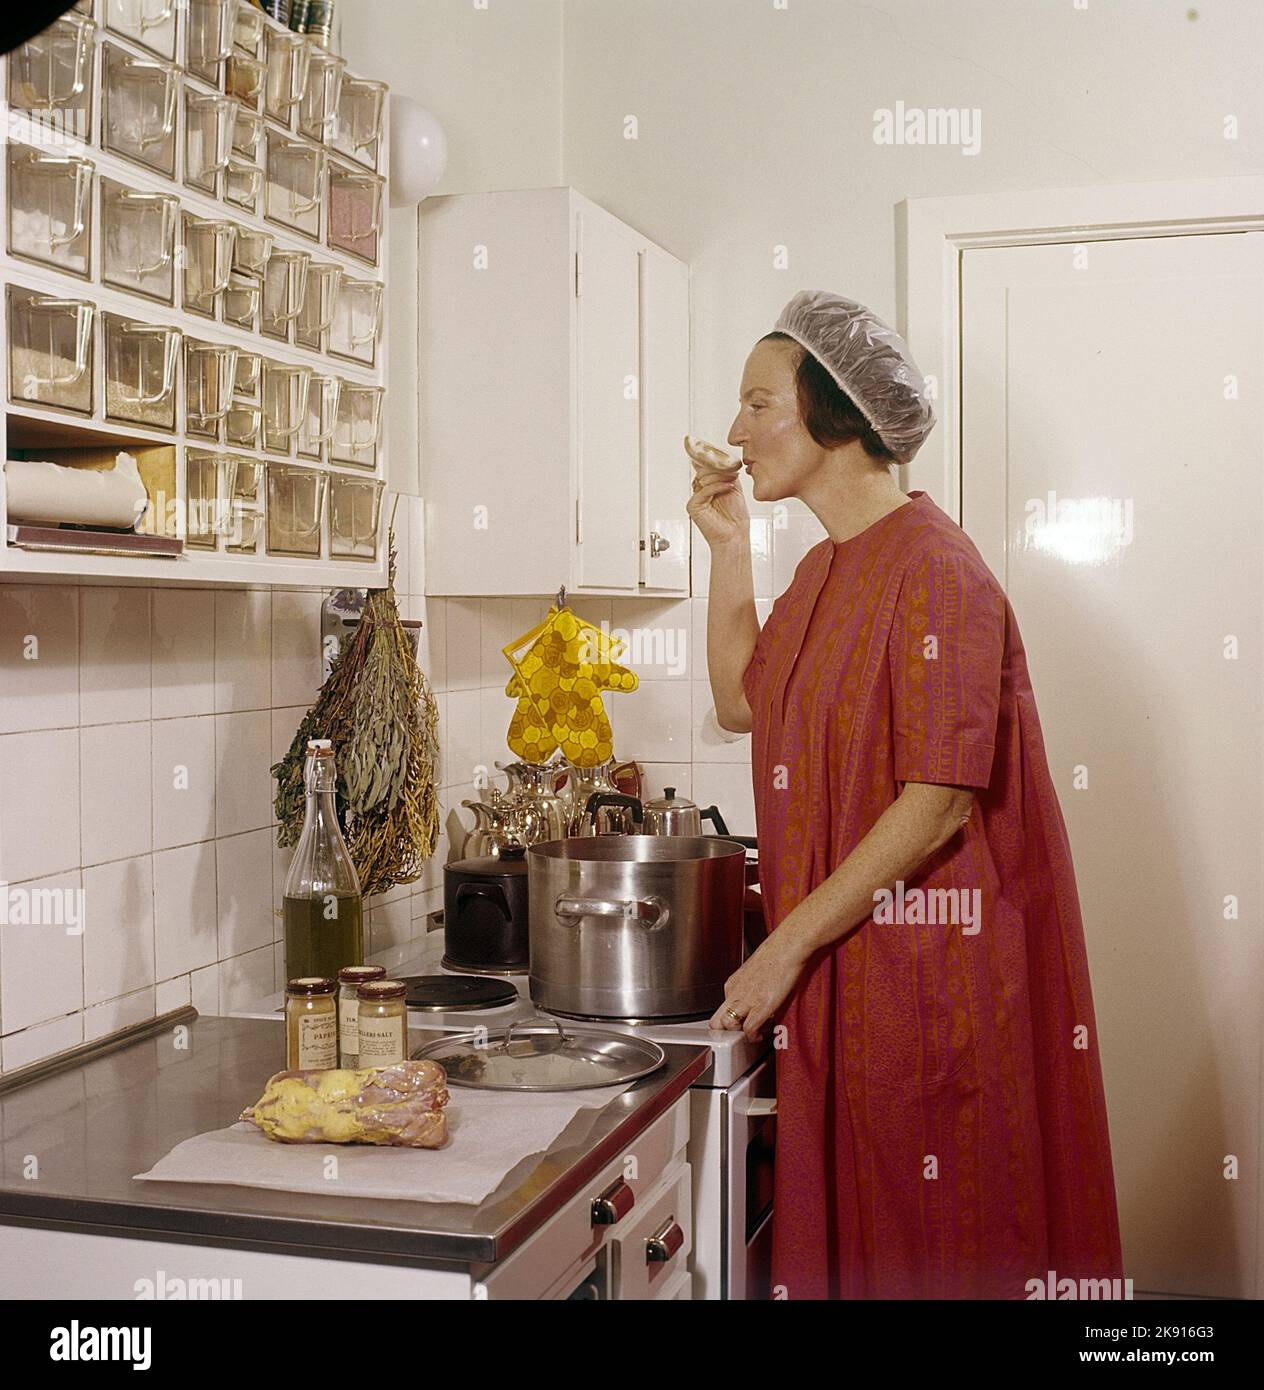 In the kitchen 1960s. Interior of a kitchen and a women cooking standing by the stove tasting something from the pots and pans. She has the hairnet on to prevent hair falling down into the food. Sweden 1962 ref cv83 Stock Photo